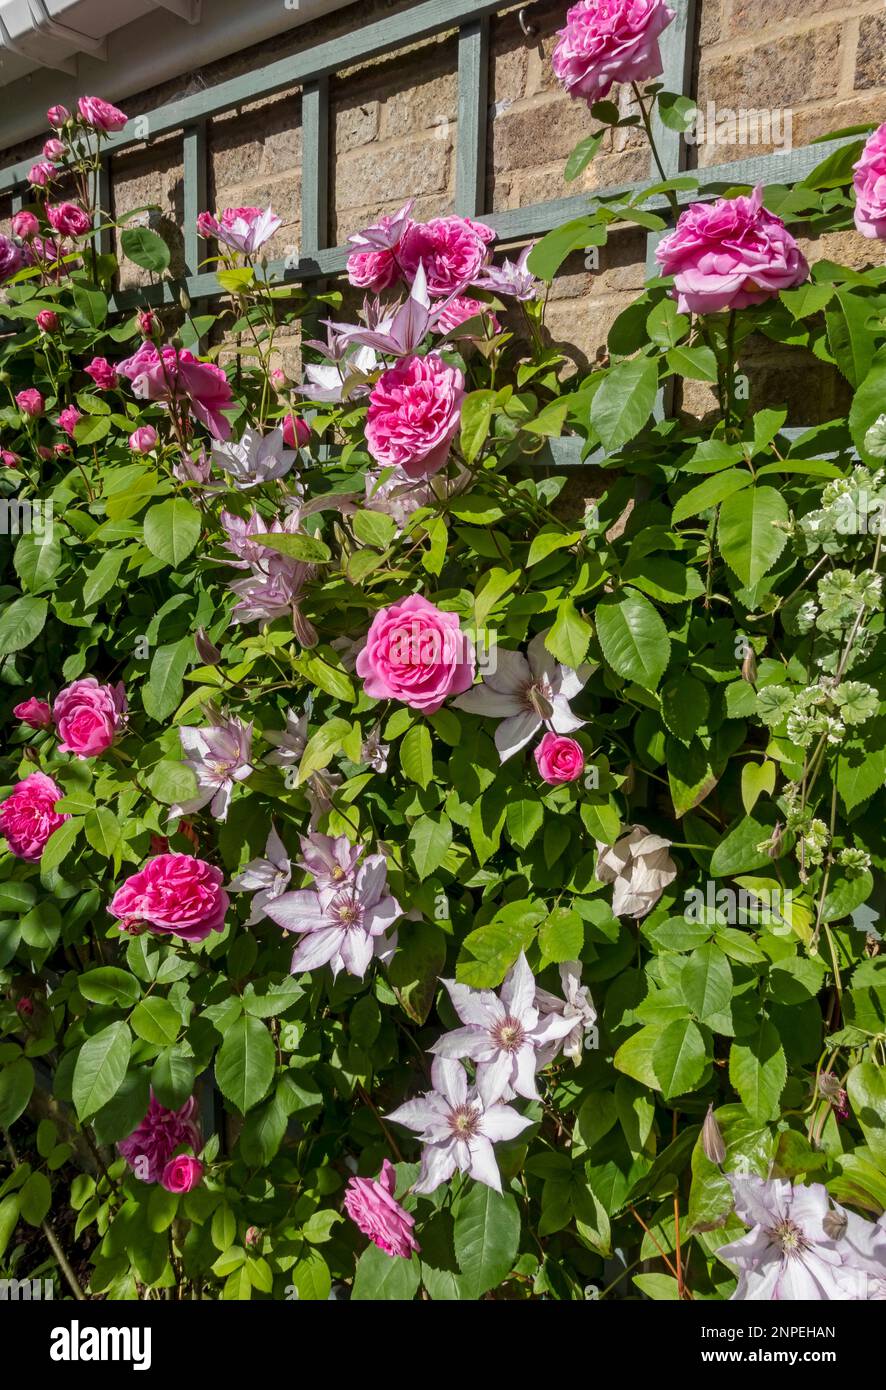 Pink rose Gertrude Jekyll and clematis Samaritan Jon flowering on a wall in the garden in summer. Stock Photo